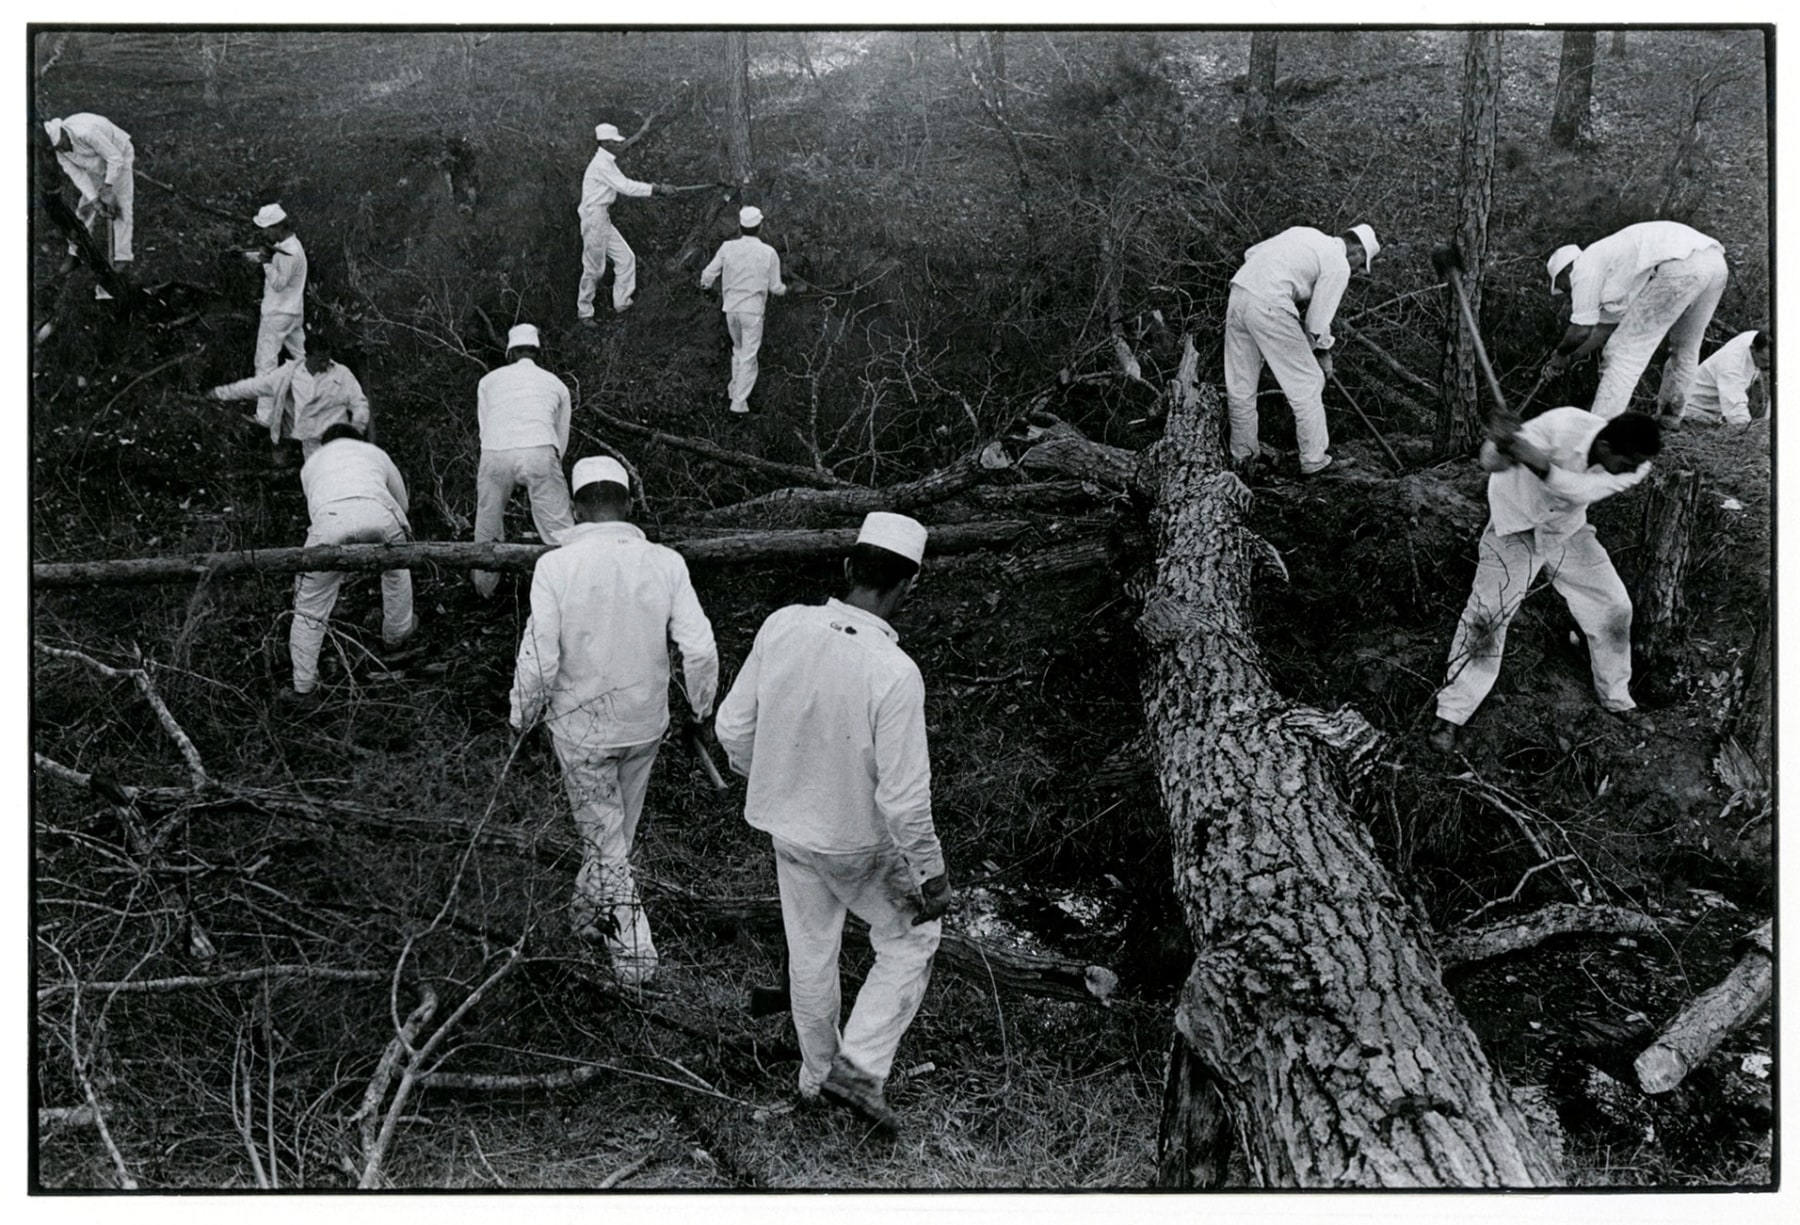 Copyright Danny Lyon / Magnum Photos, The Ellis Woods, from Conversations with the Dead, 1968